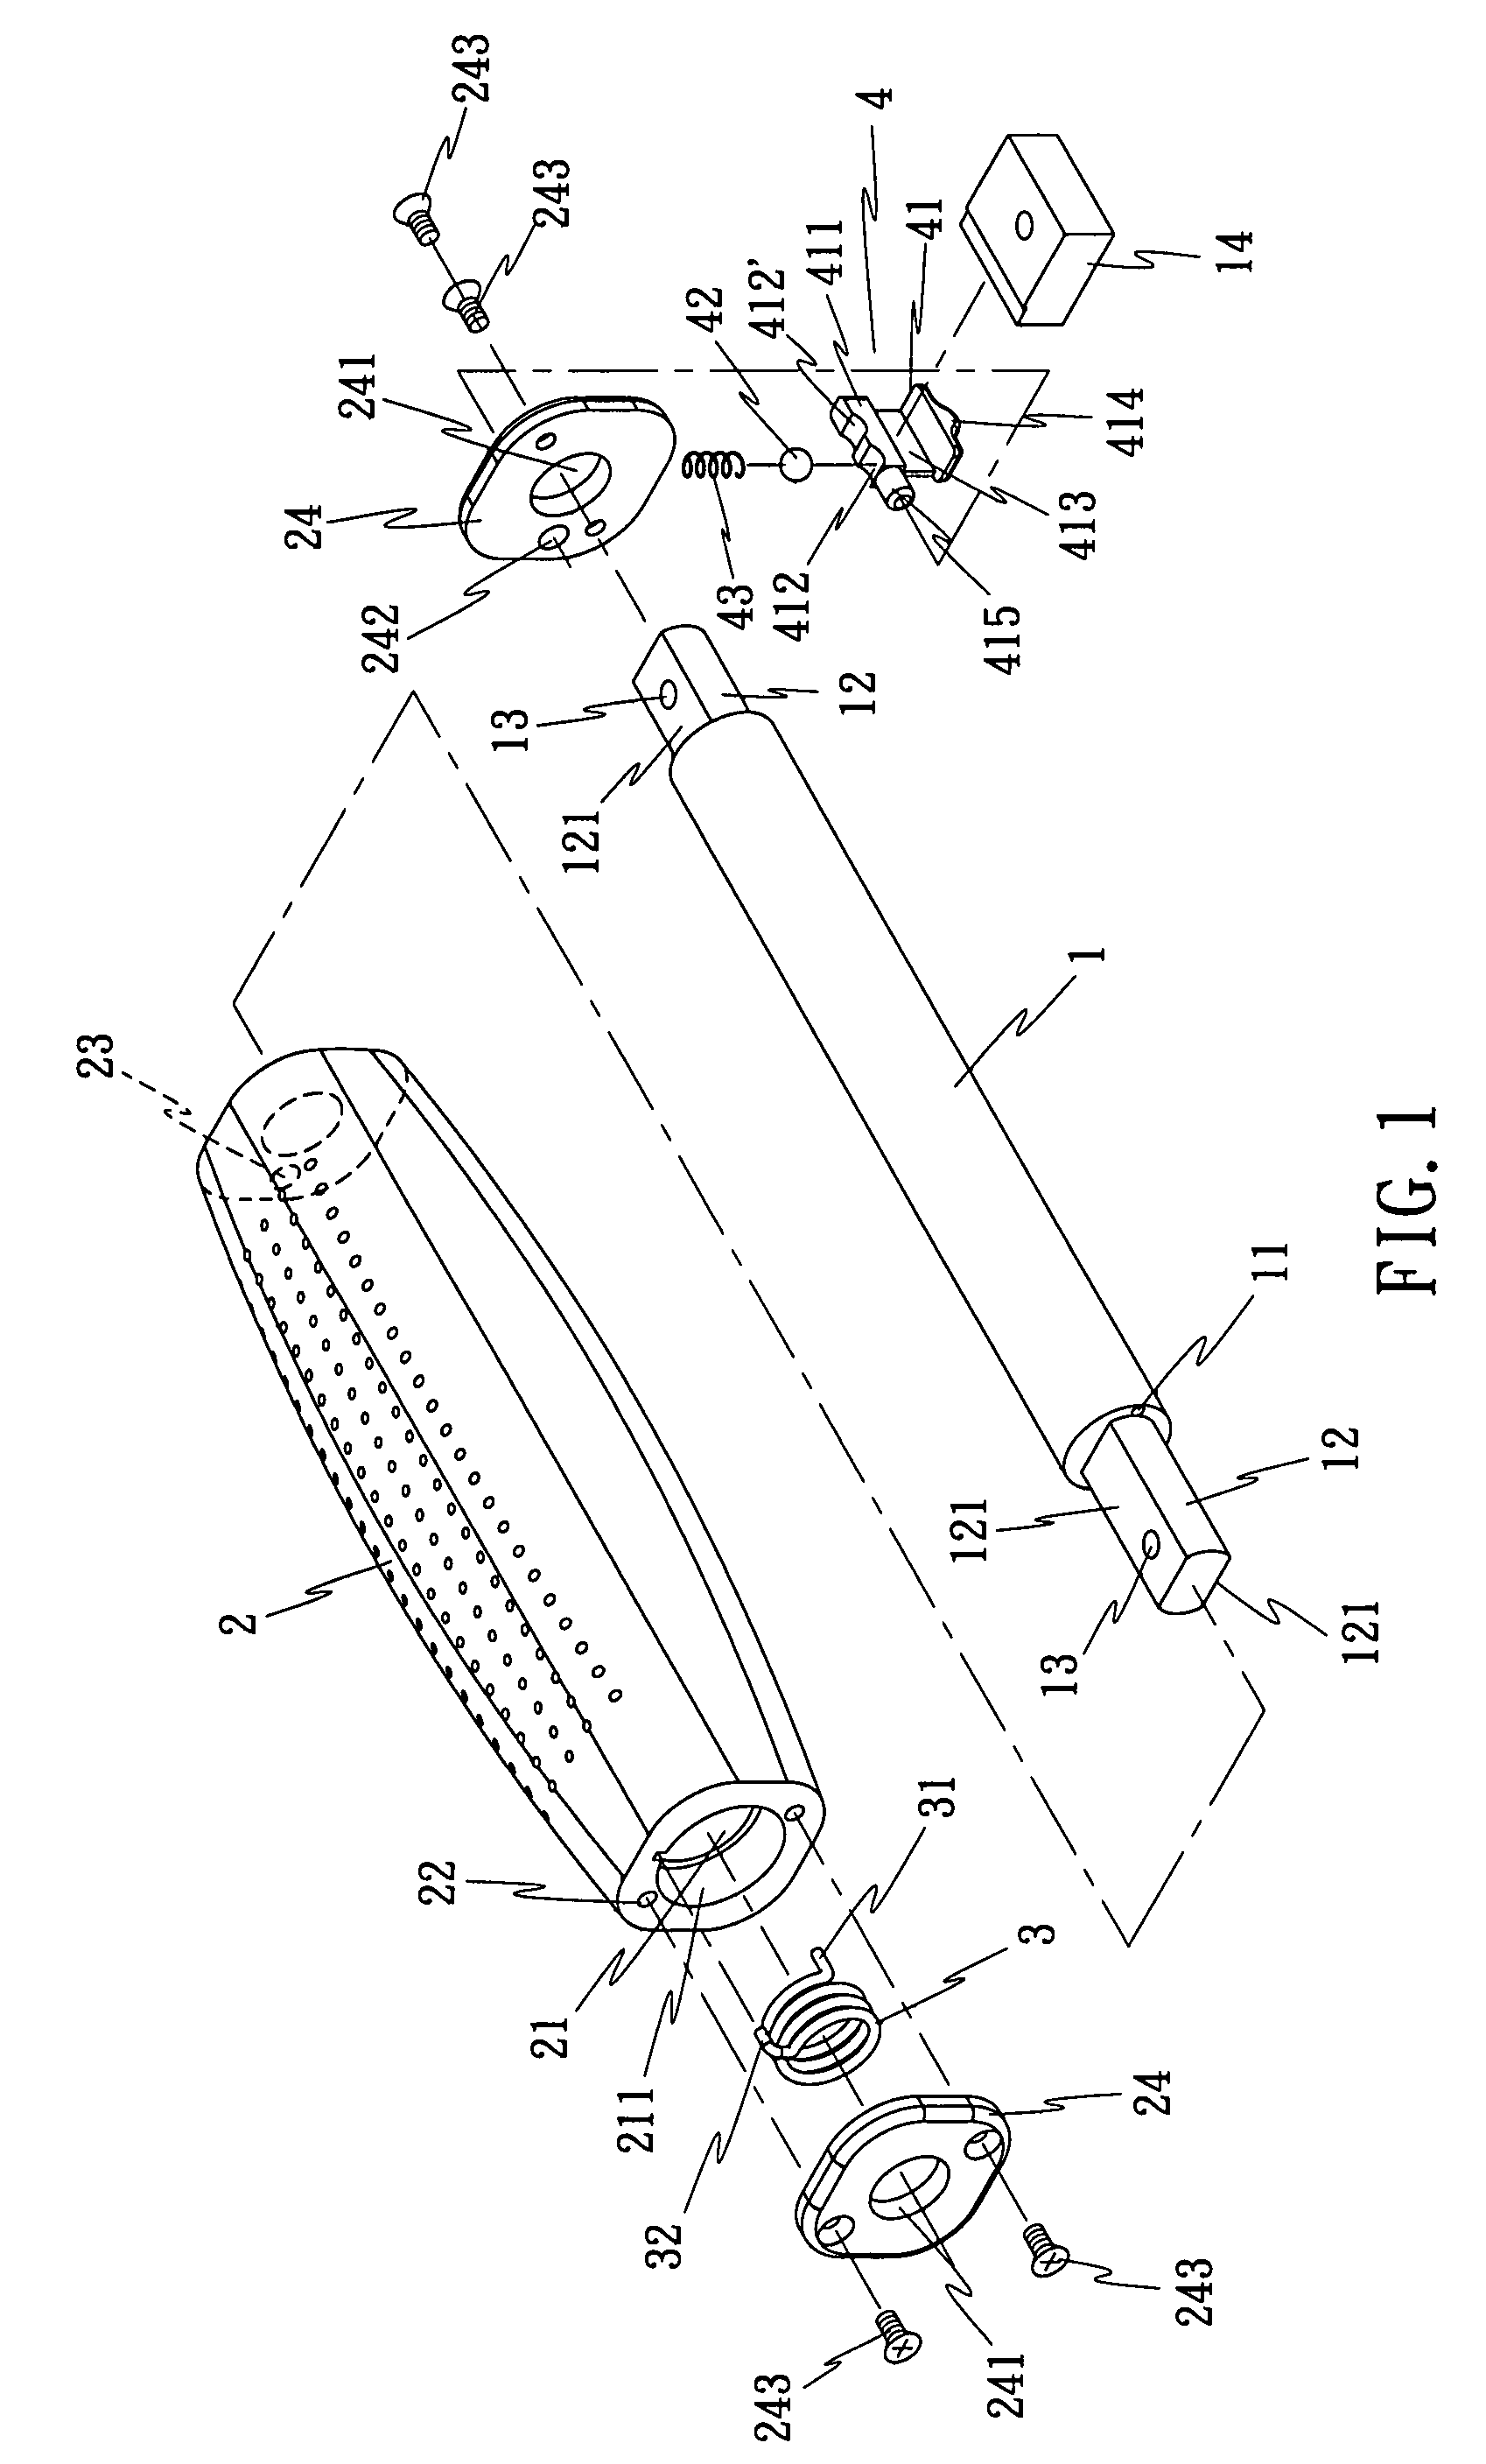 Rotation-controllable rotary grip assembly for luggage handle